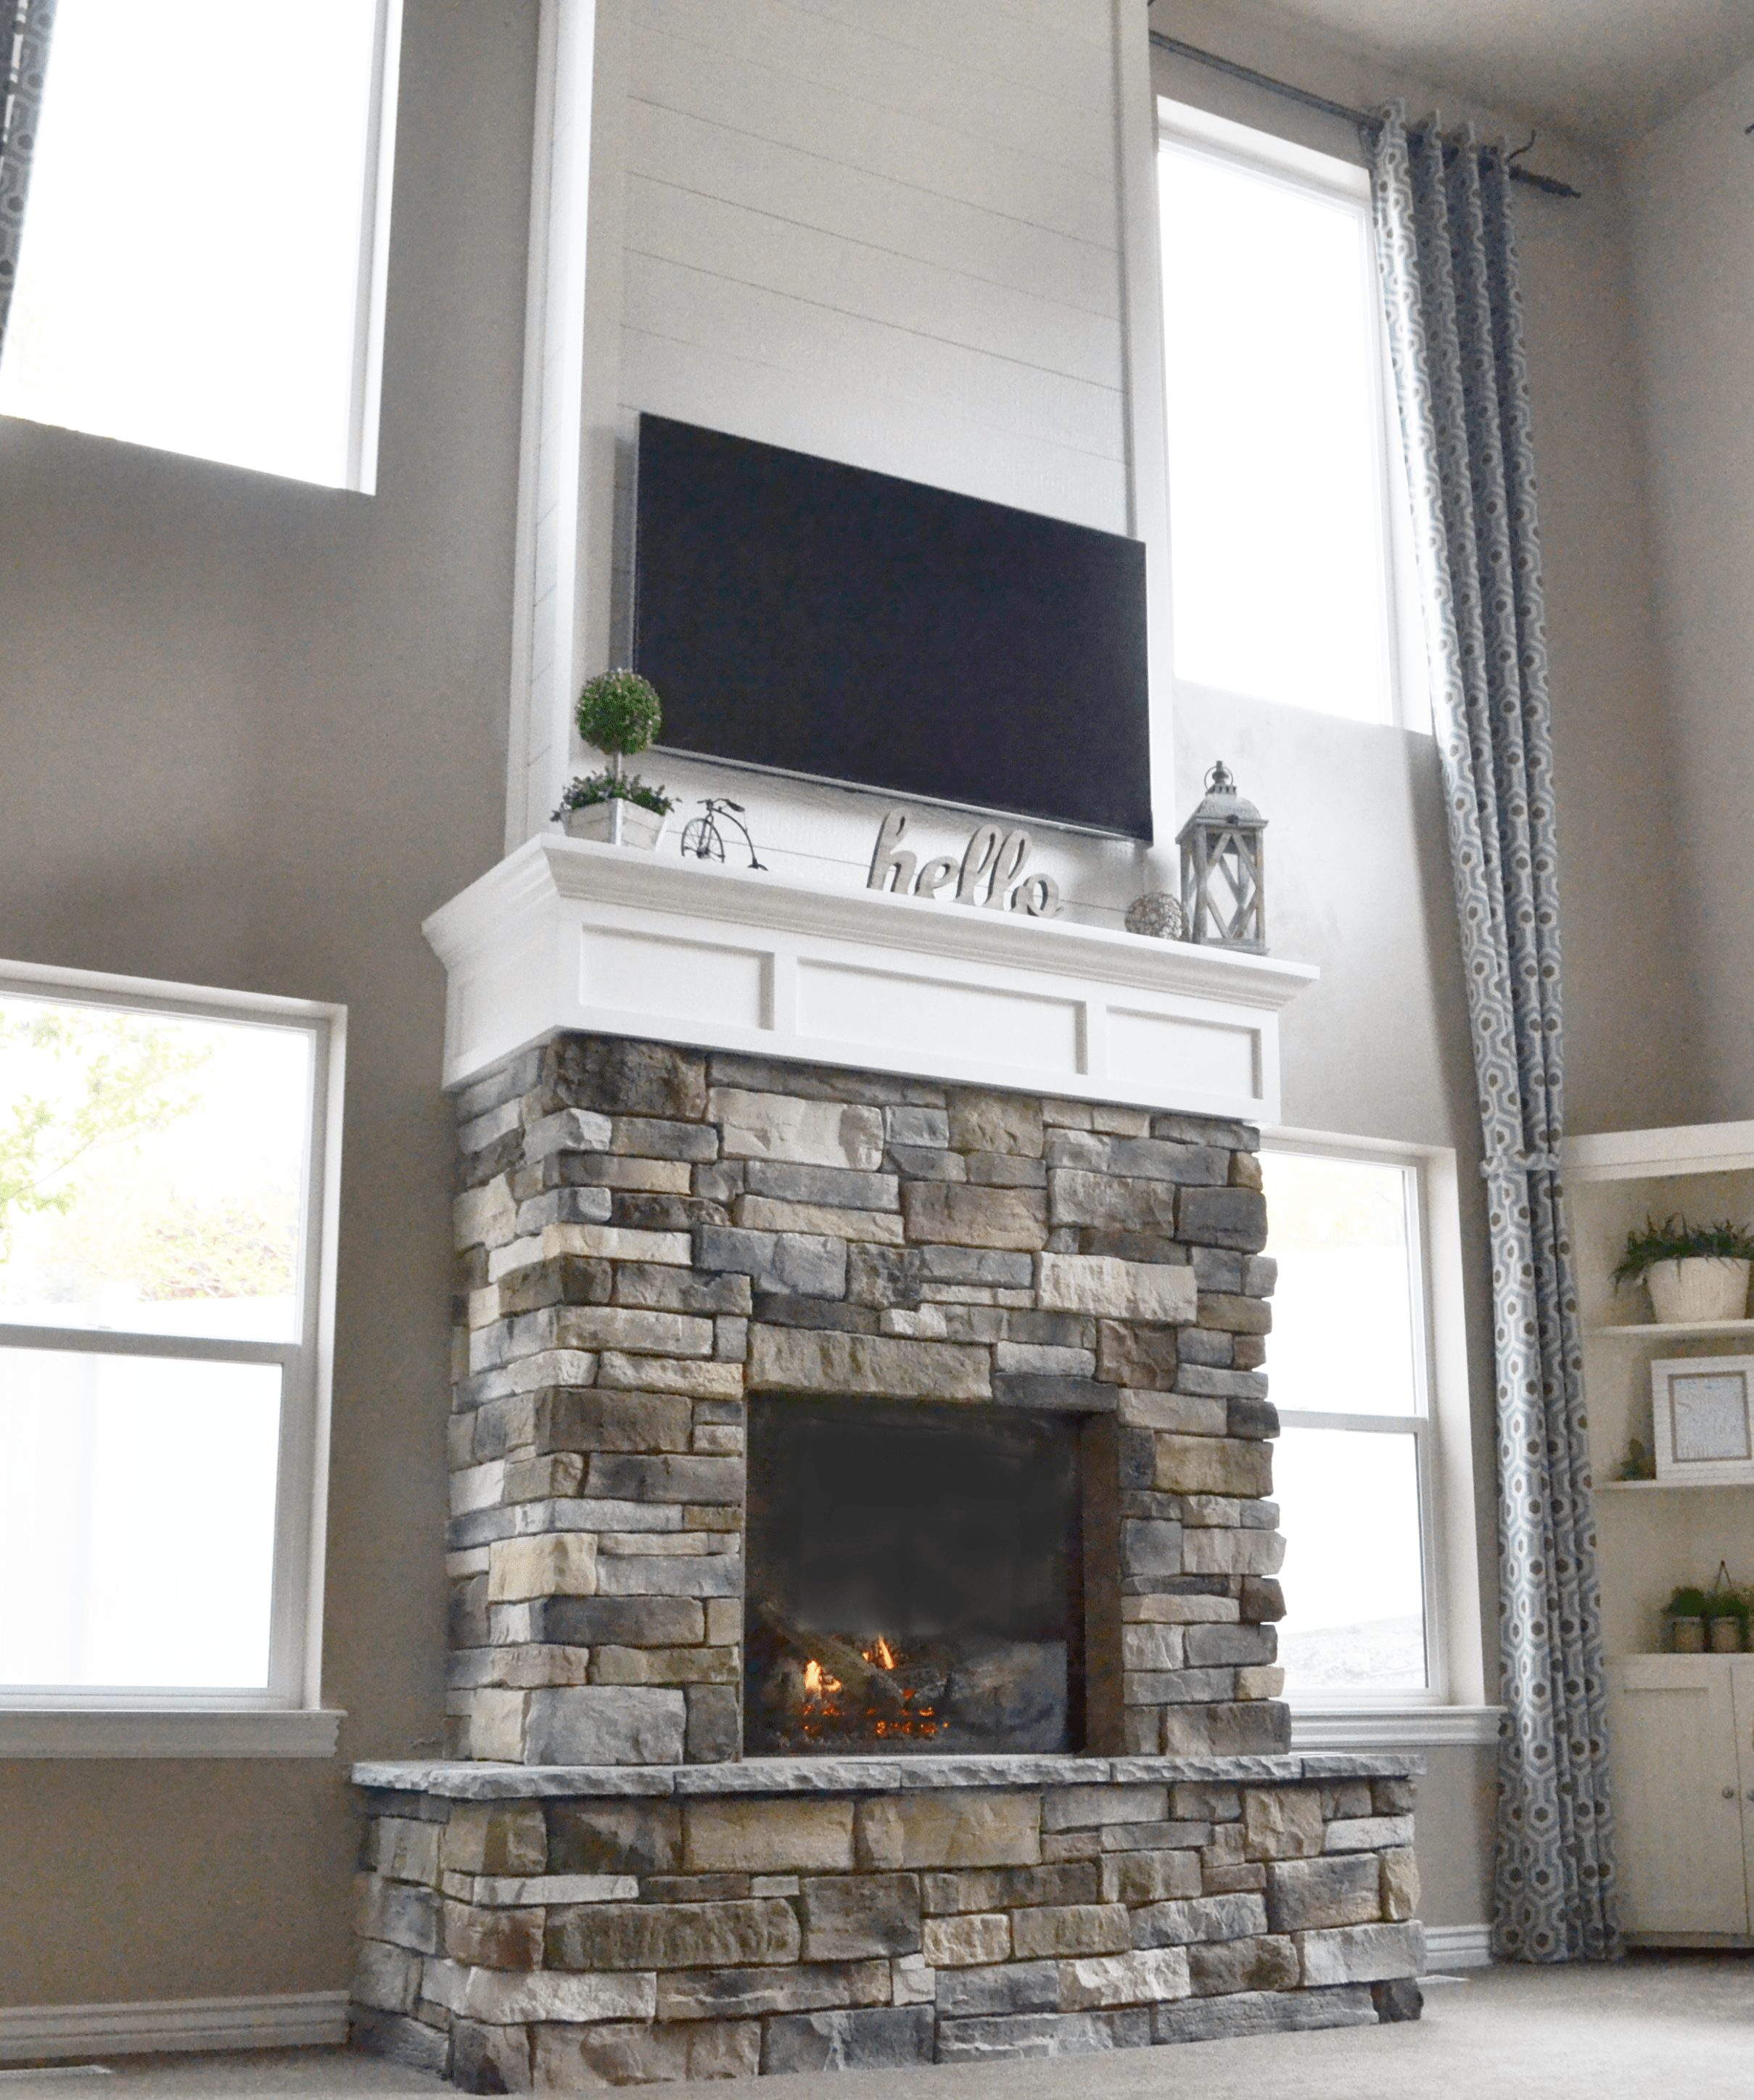 How to Build A Brick Fireplace Unique Diy Fireplace with Stone & Shiplap